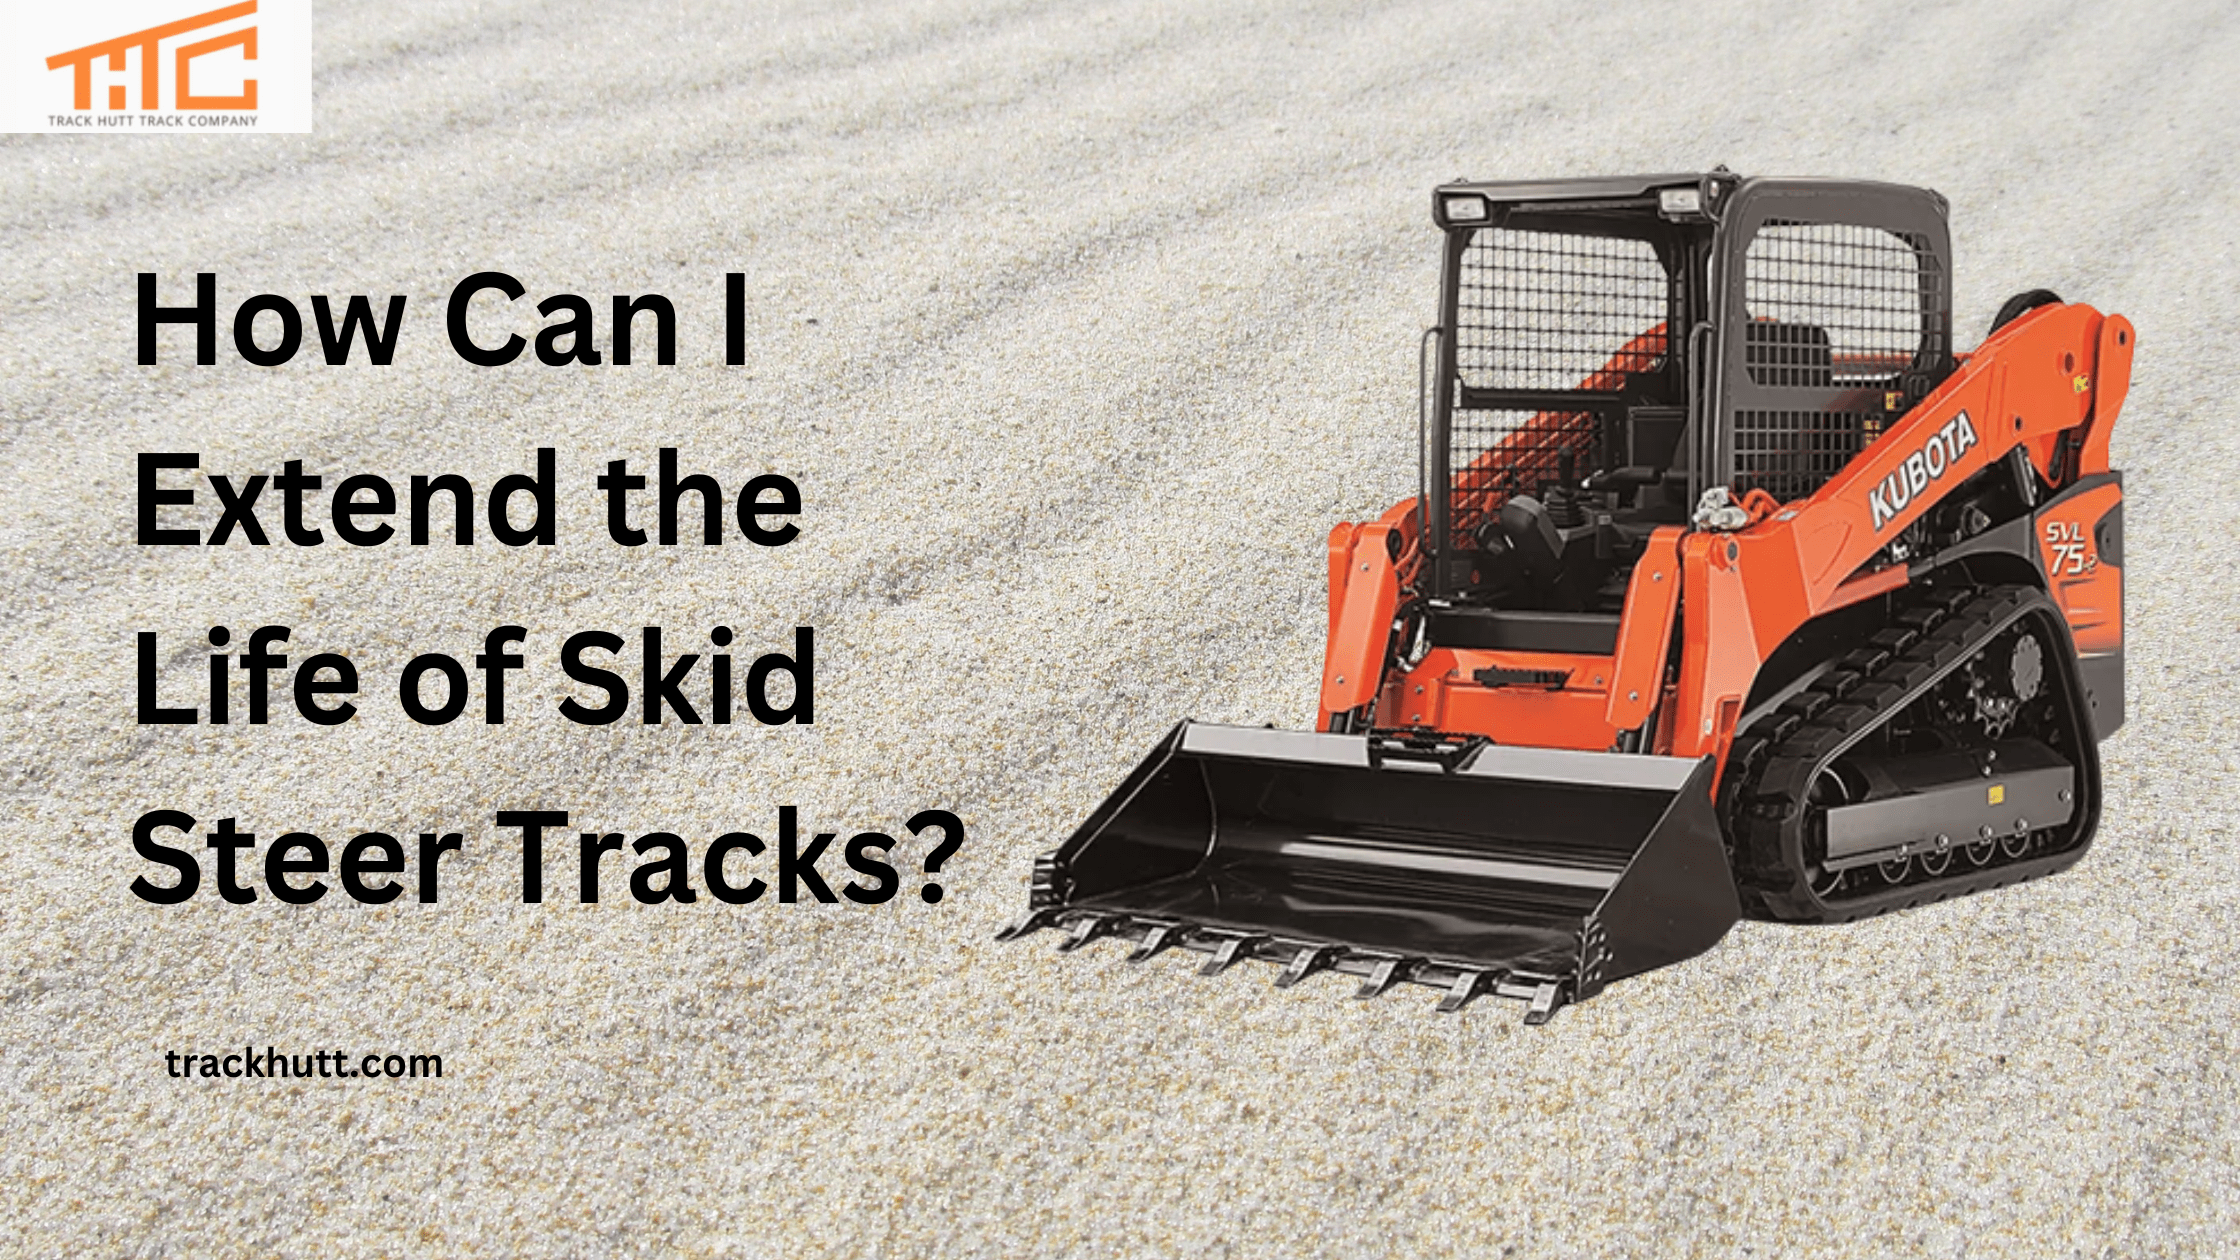 How Can I Extend the Life of Skid Steer Tracks?